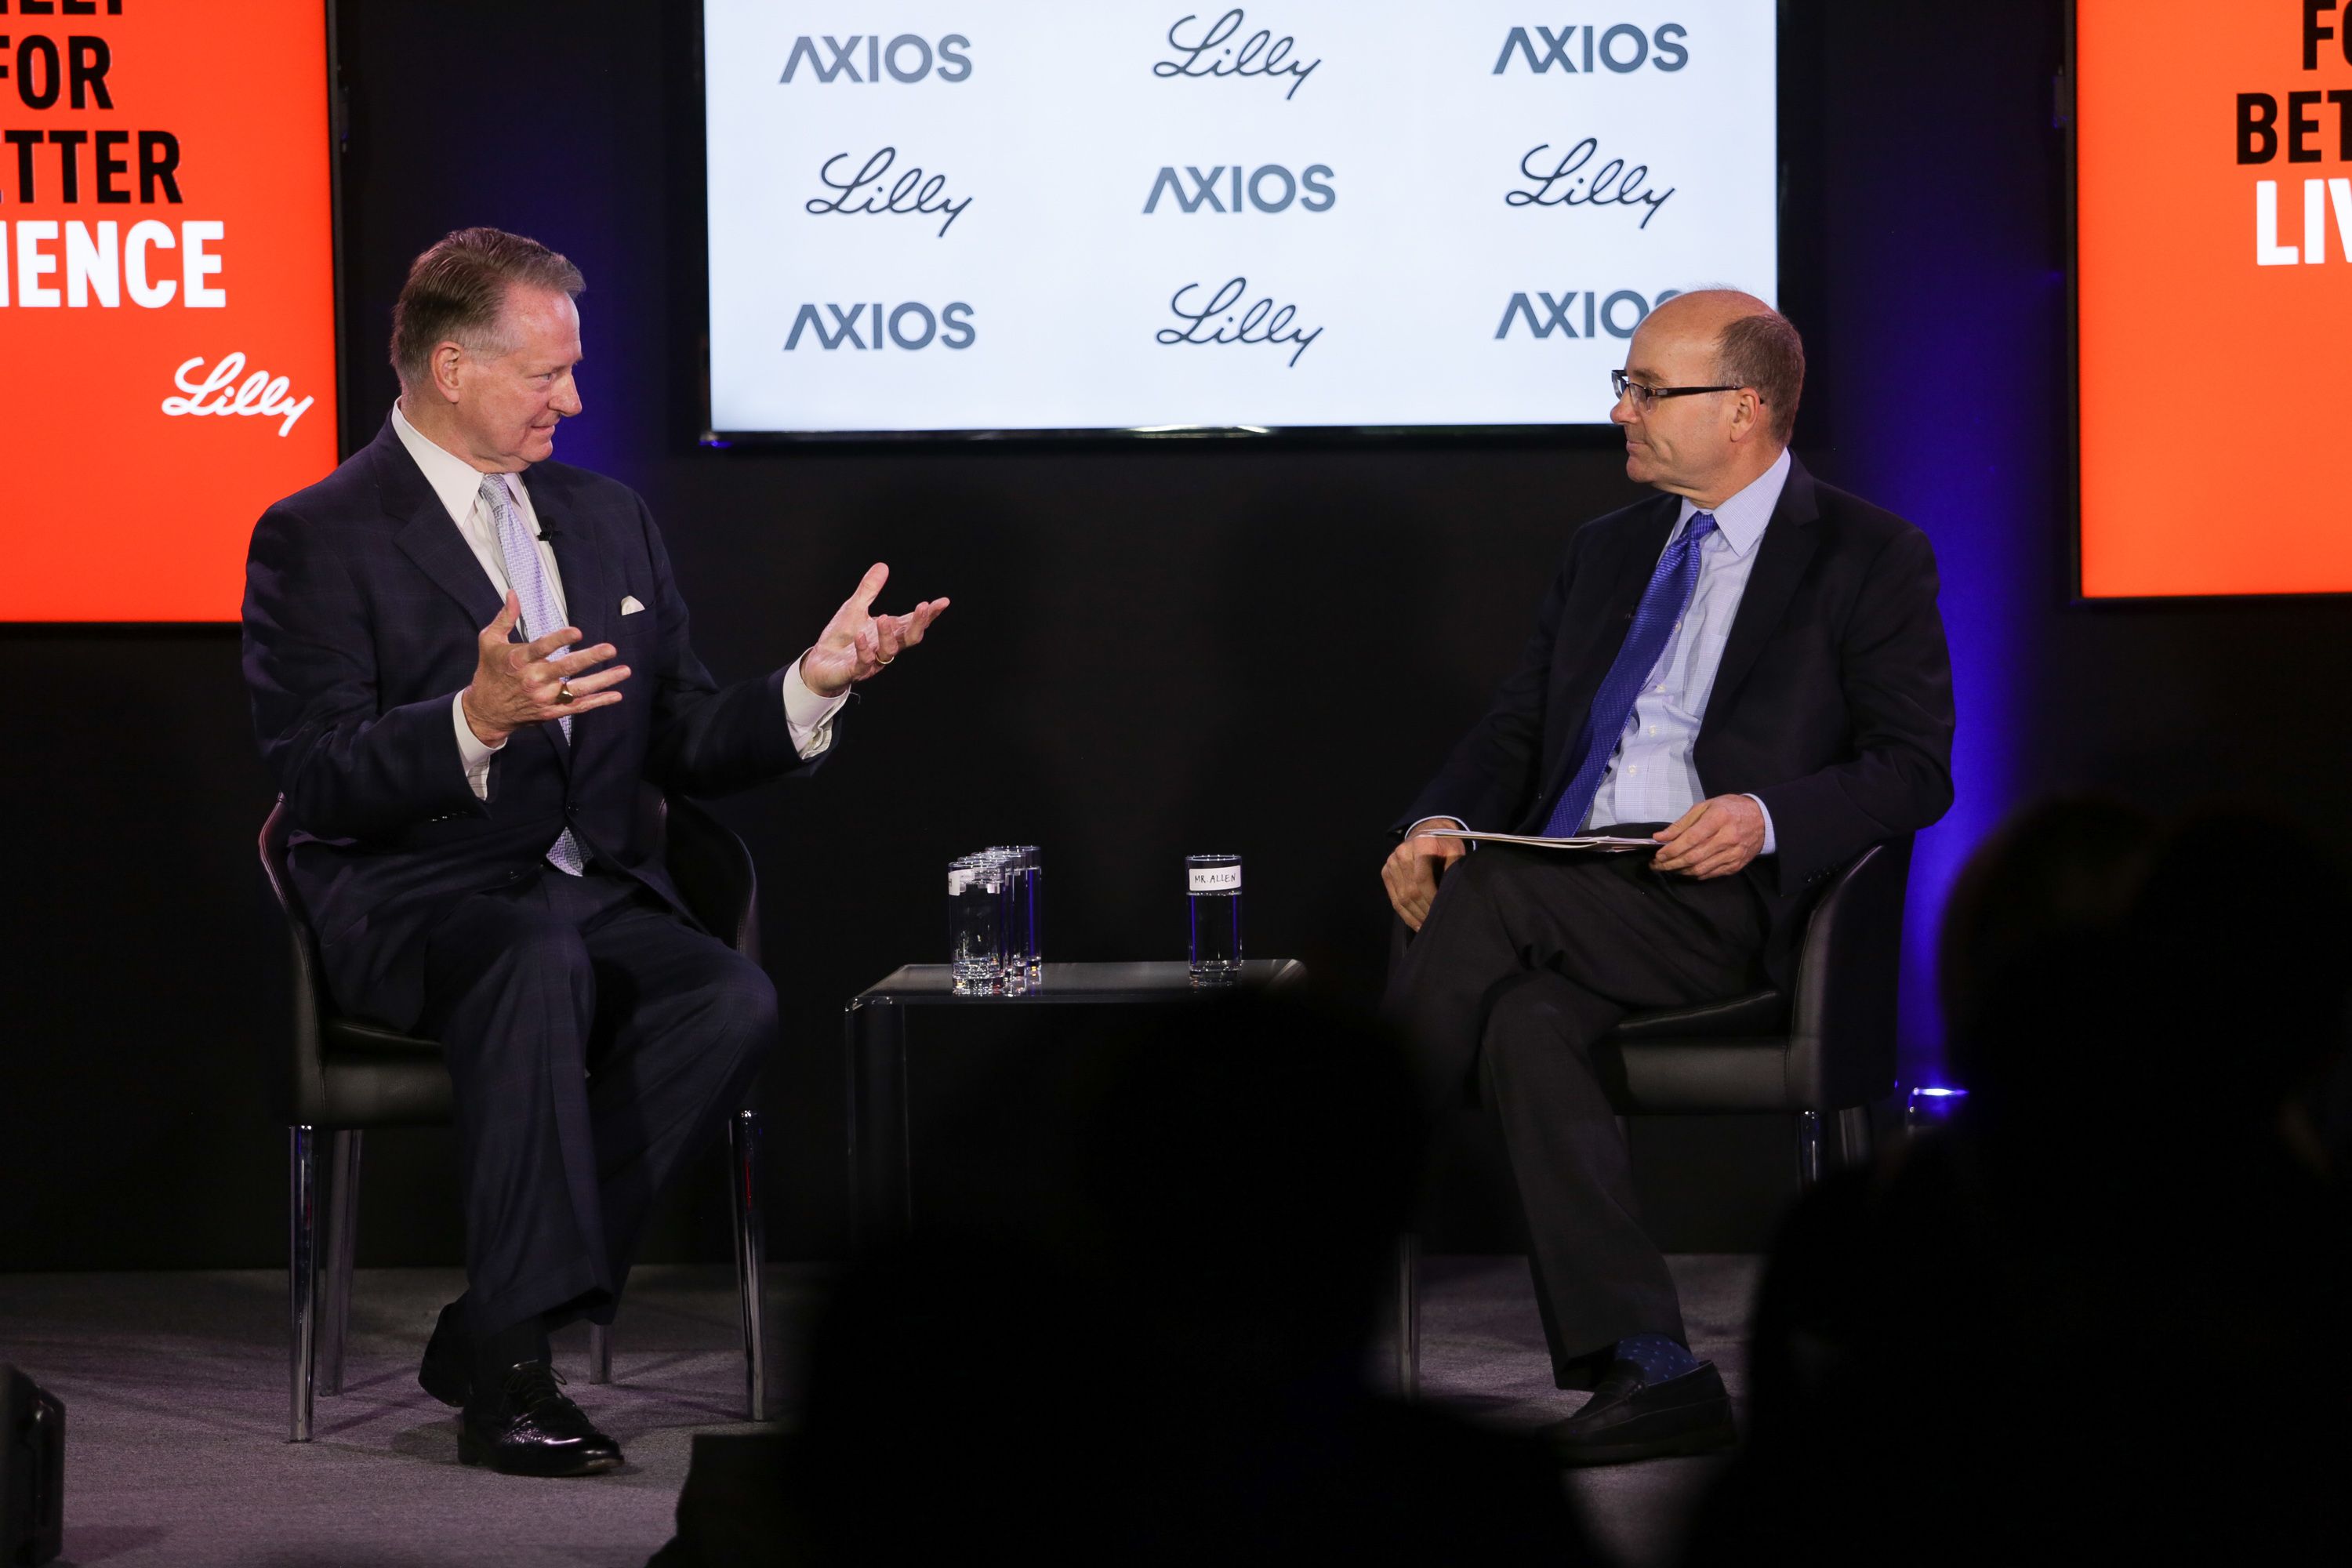 Mayor Steve Williams and Mike Allen talking on the Axios events stage.